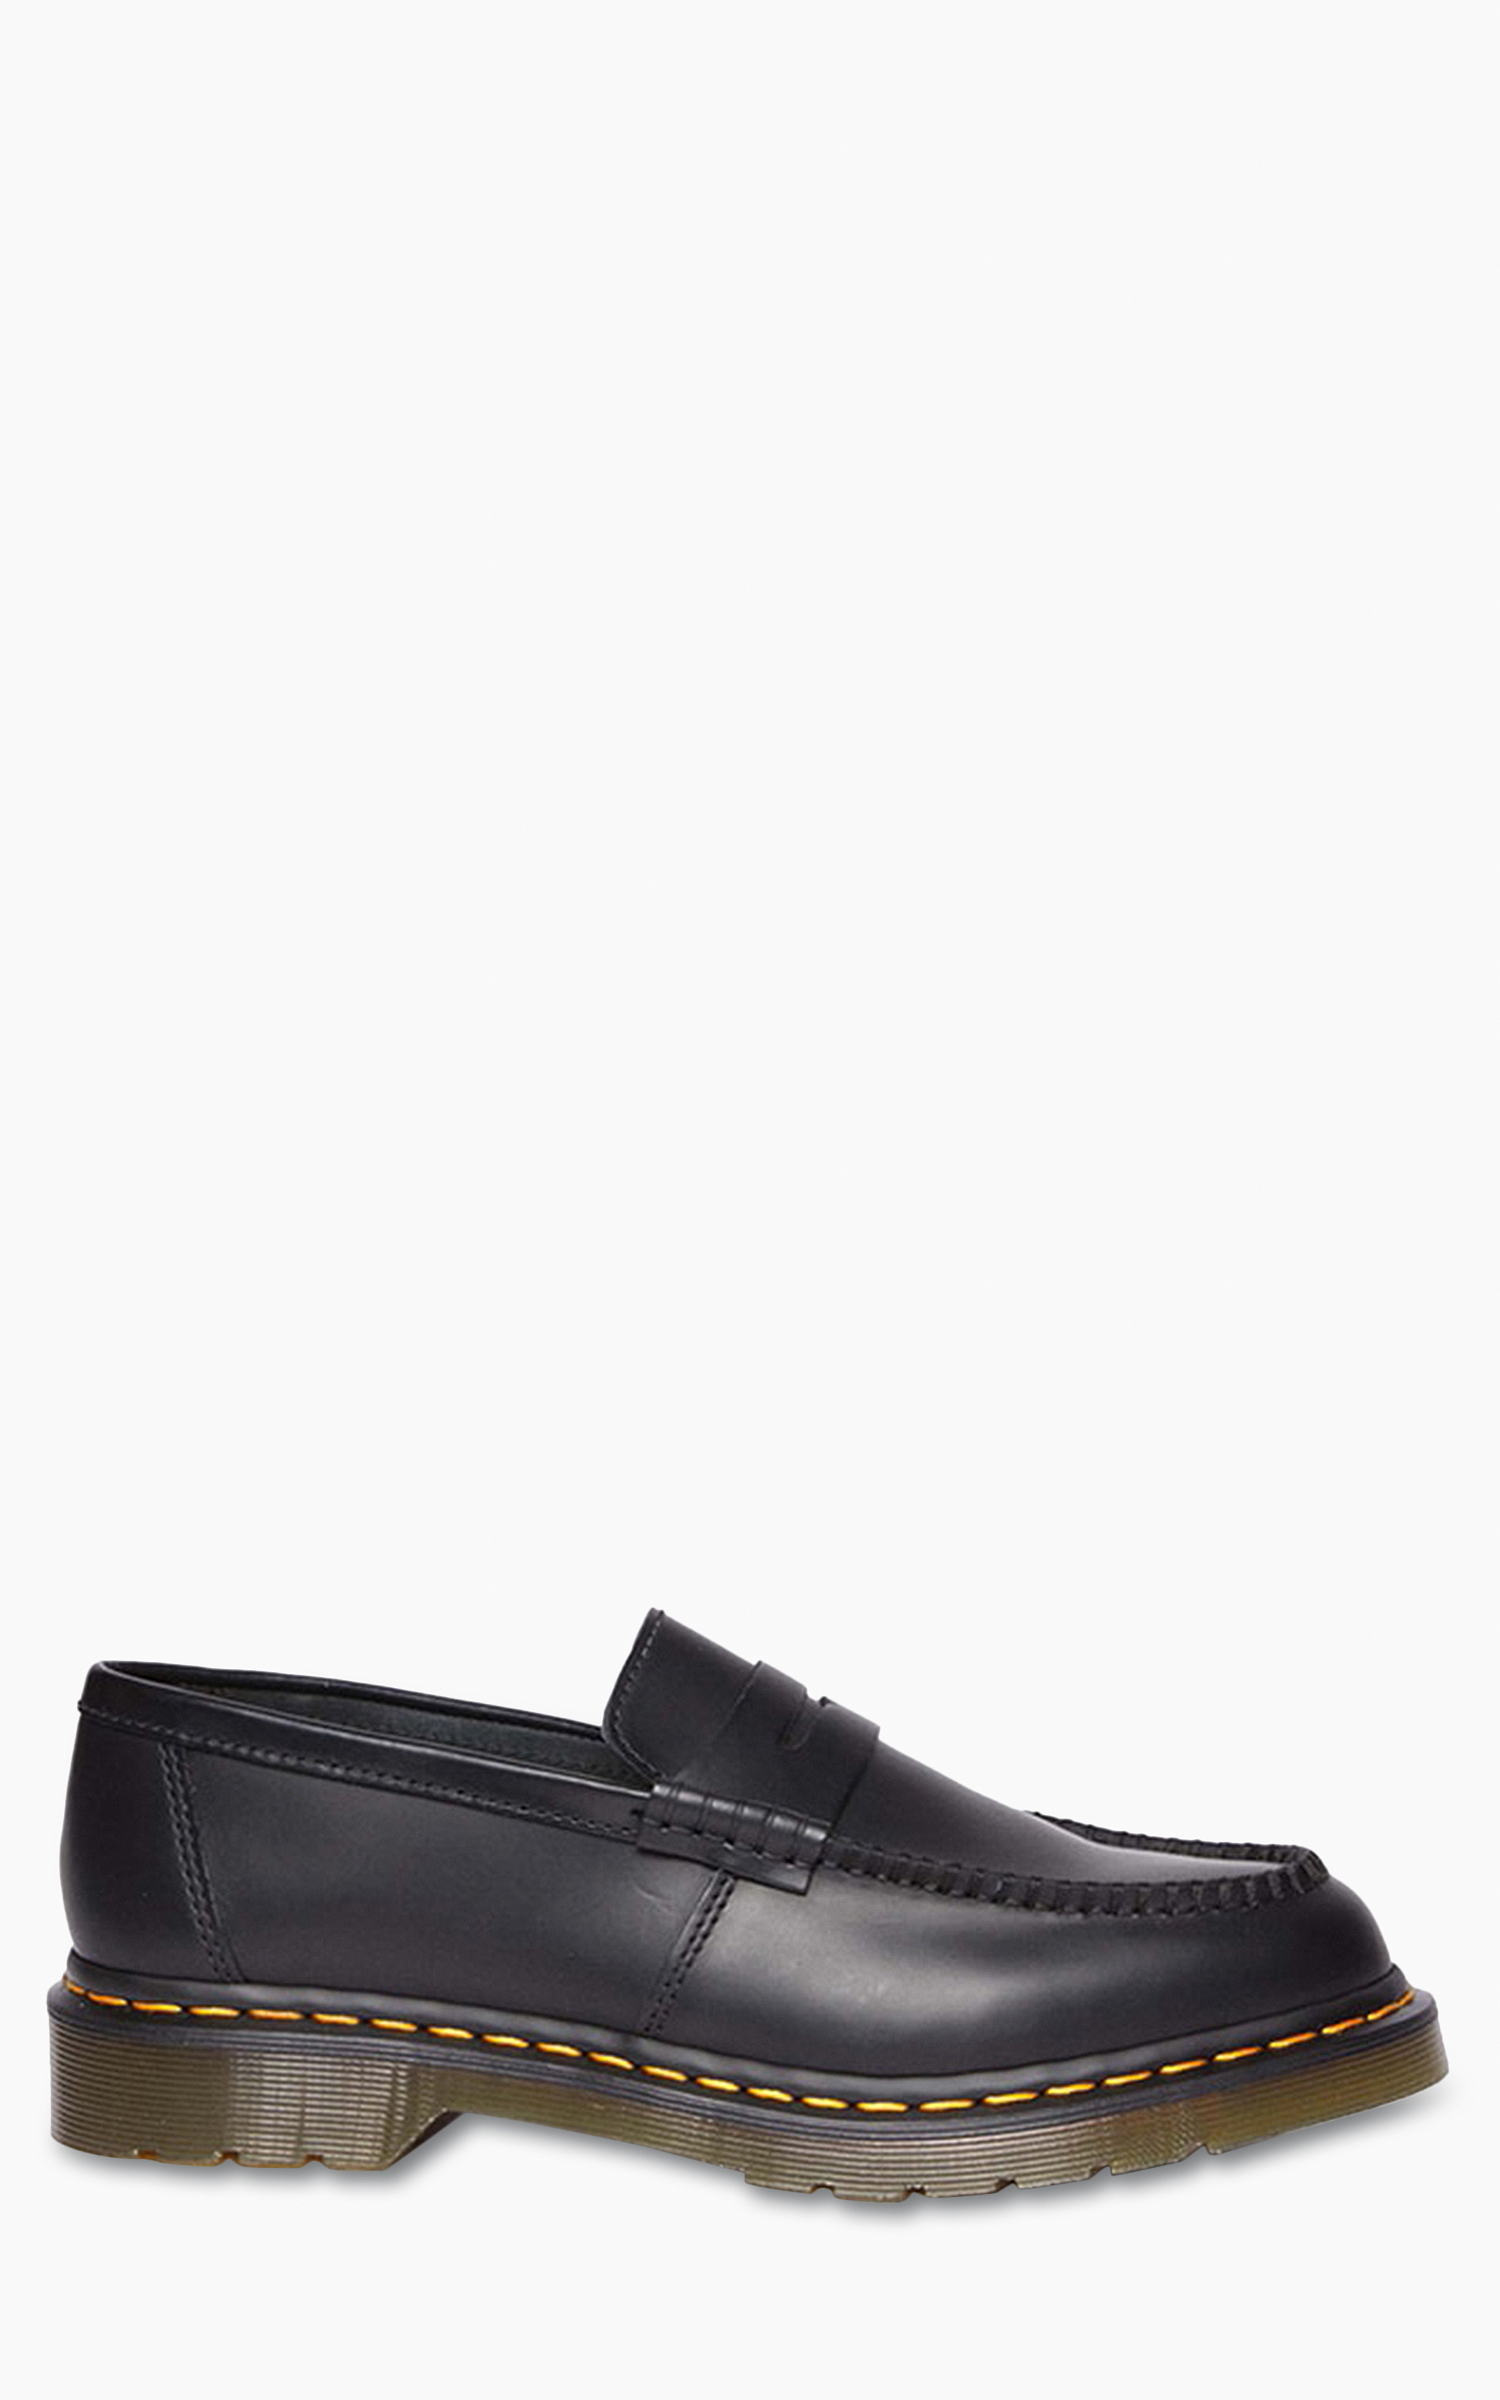 Dr. Martens Penton Smooth Leather Loafers Black | Cultizm